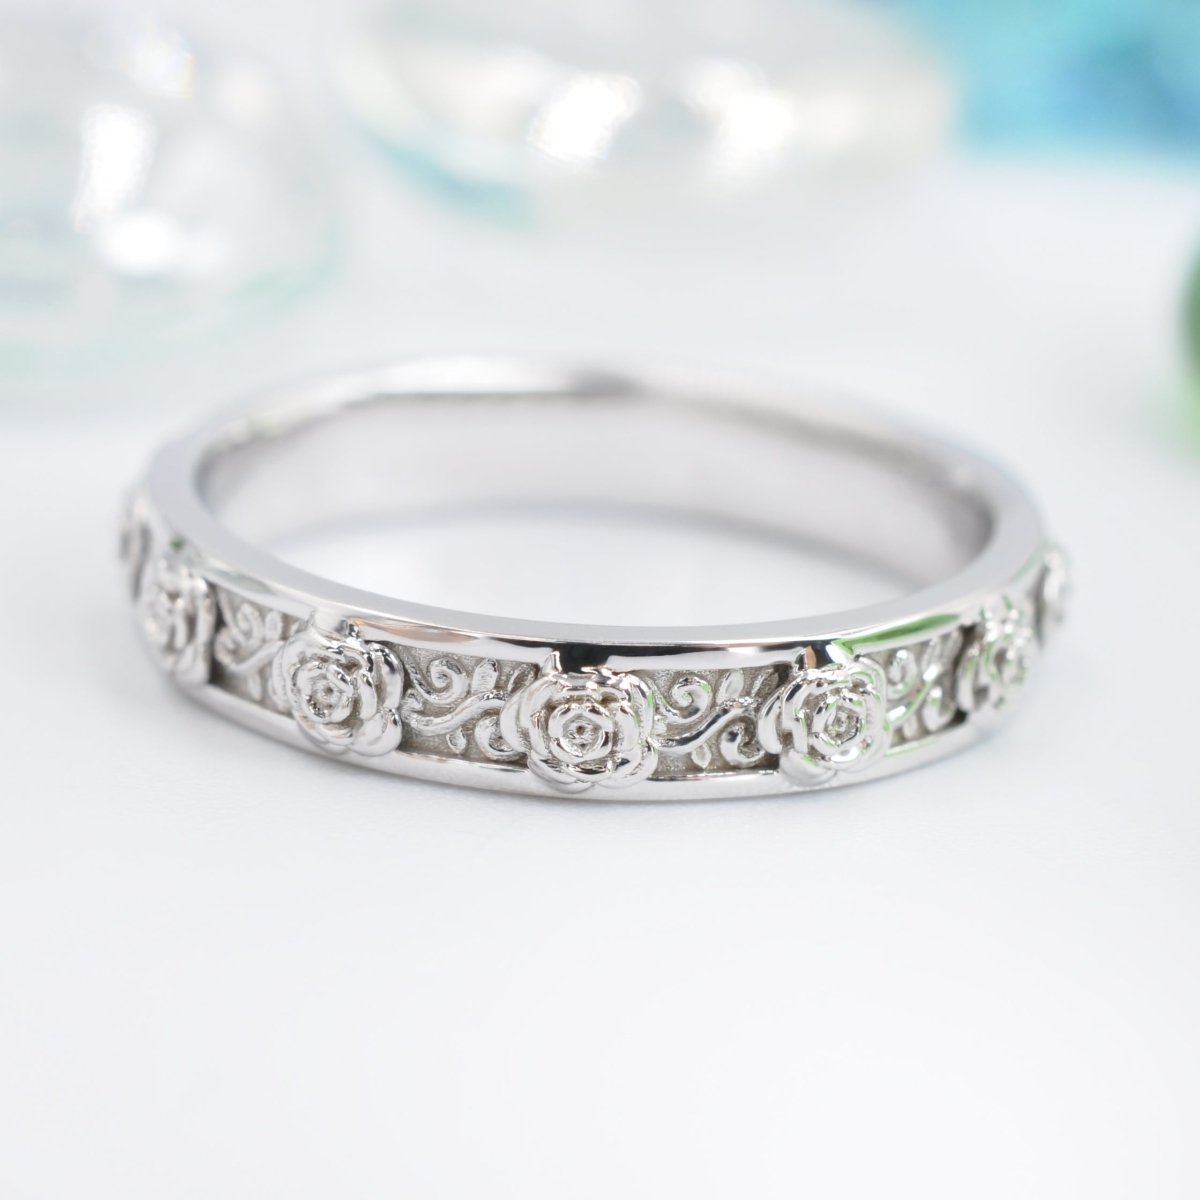 Low-Cost Plain Wedding band in 14KT White Gold - Primestyle.com